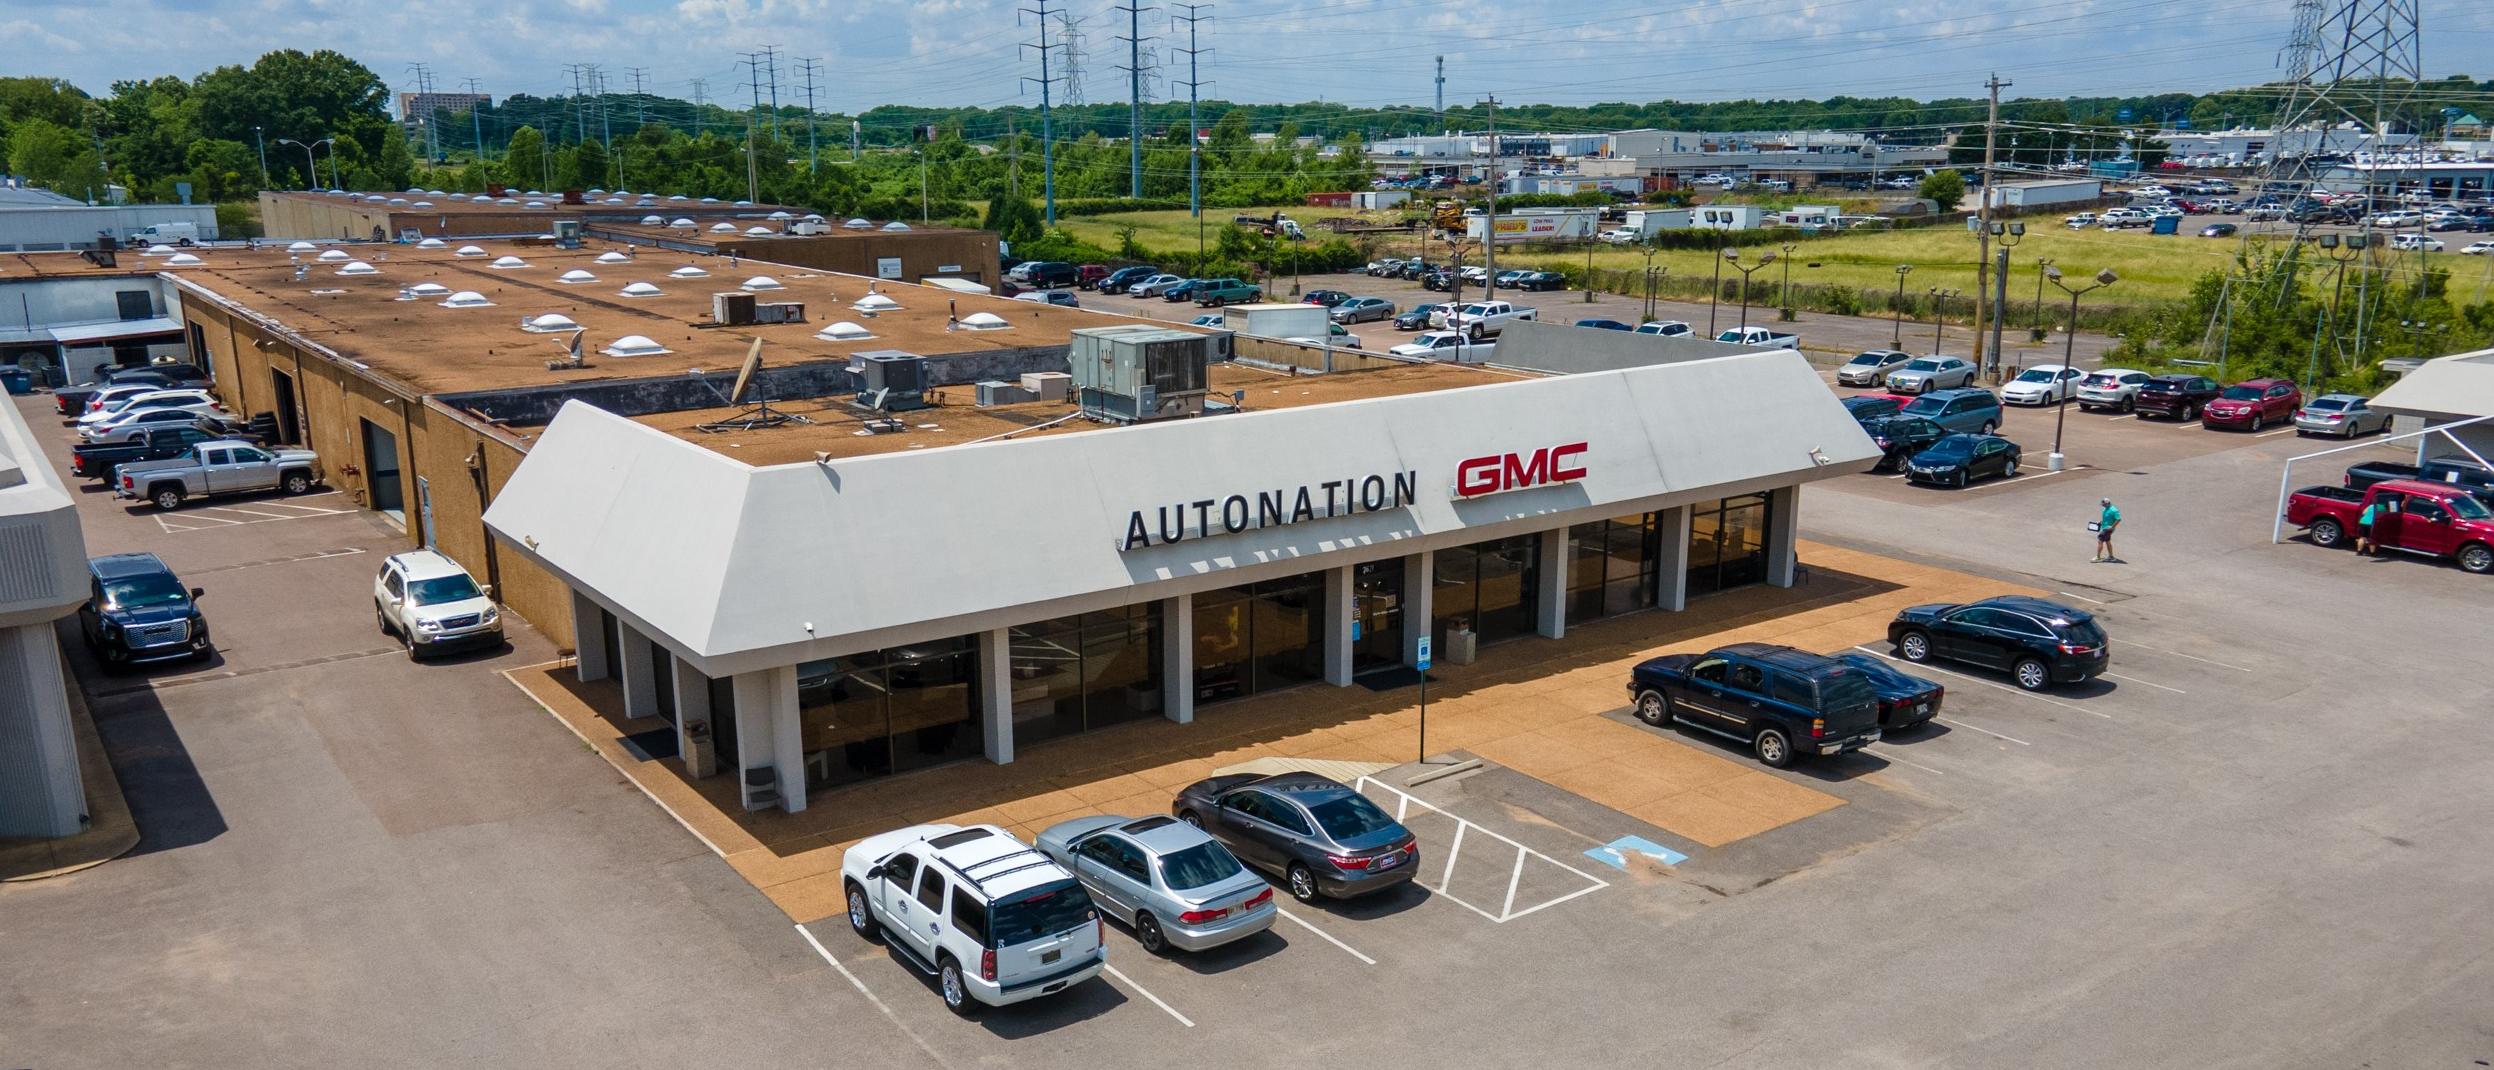 Hours & Directions To AutoNation GMC Mendenhall 